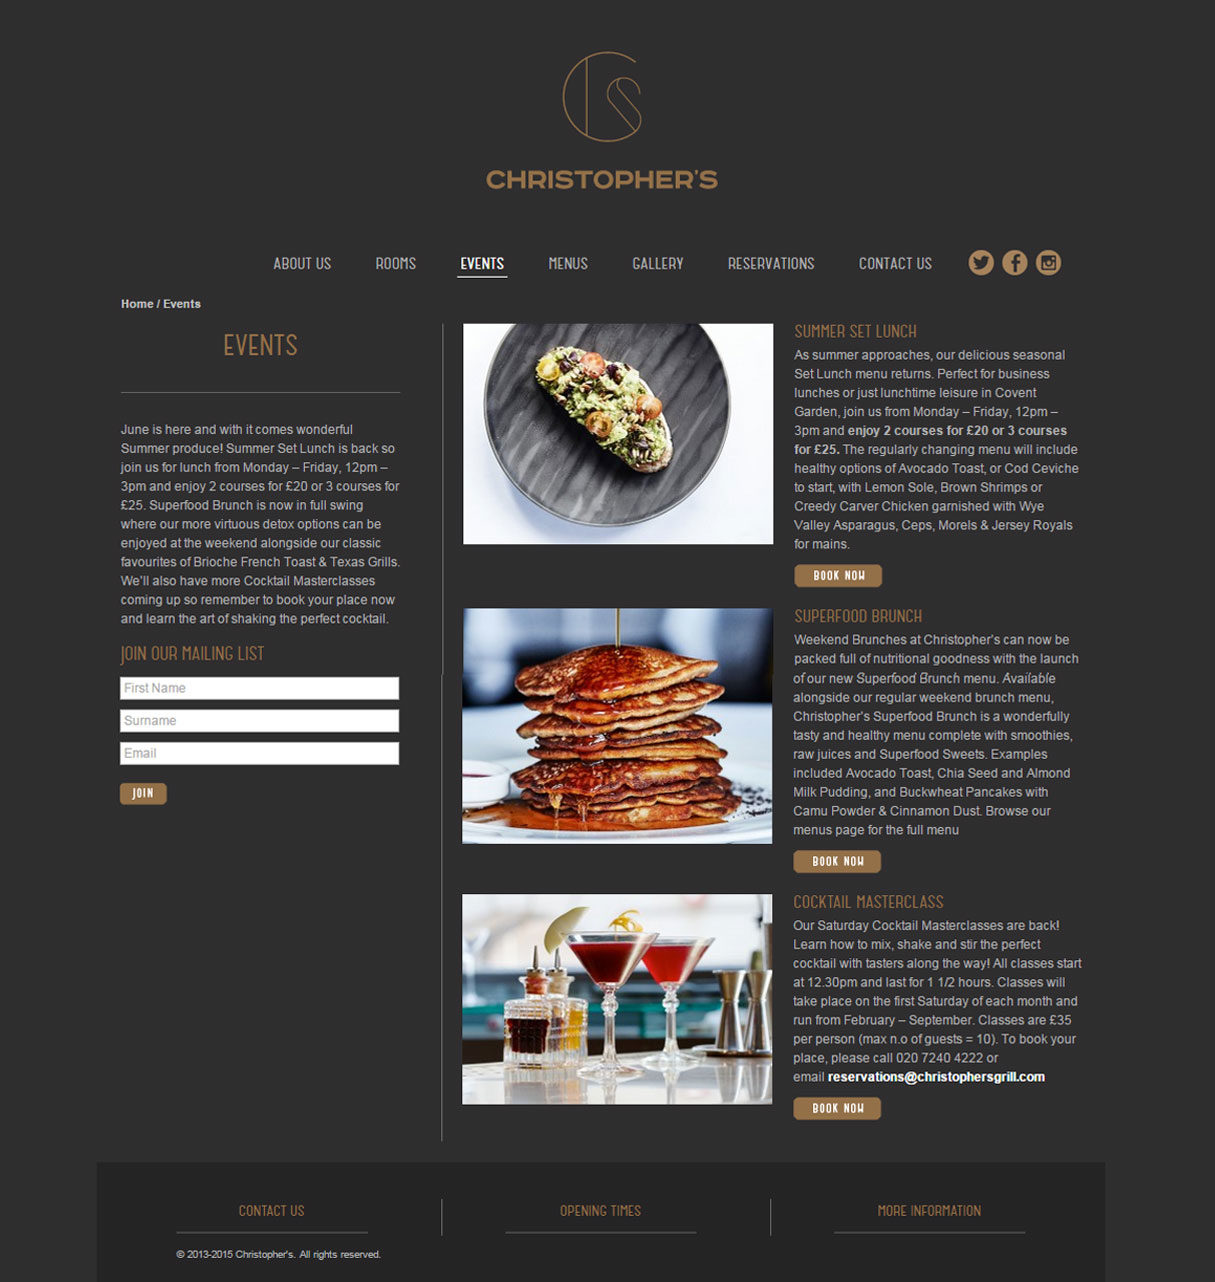 Christopher's Reataurant website design, Events page